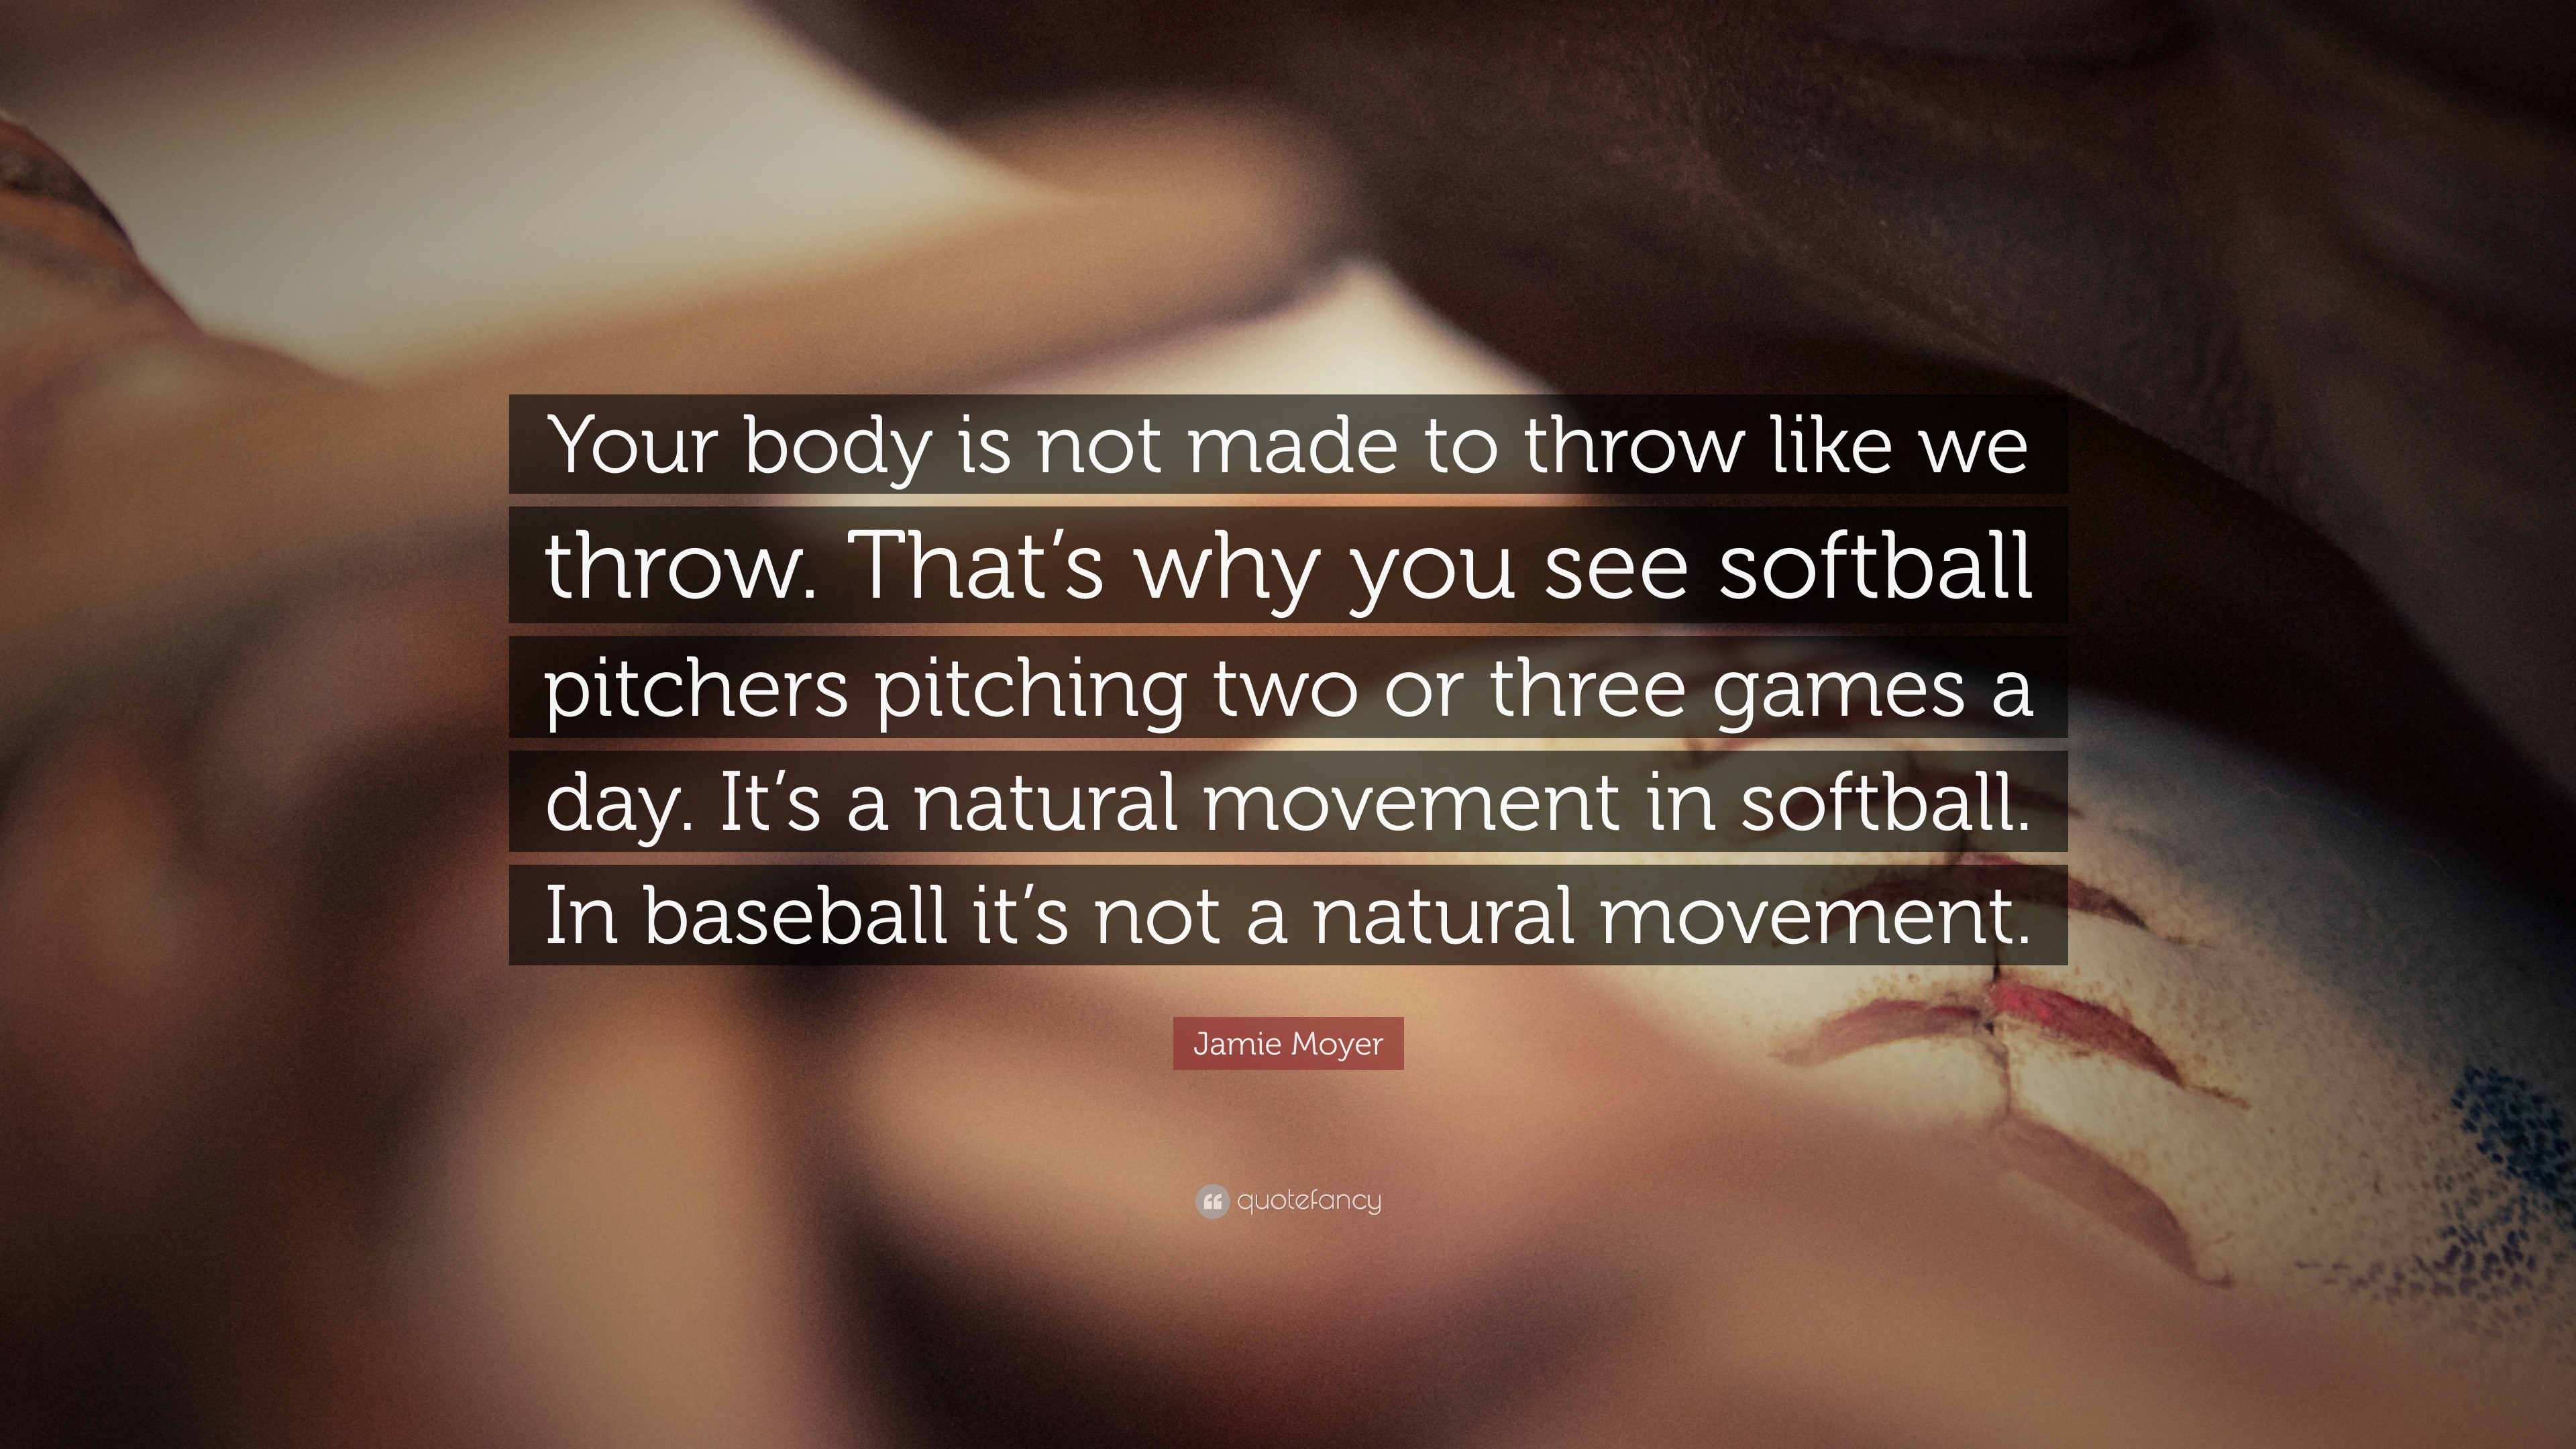 Softball Quotes Wallpapers  Wallpaper Cave